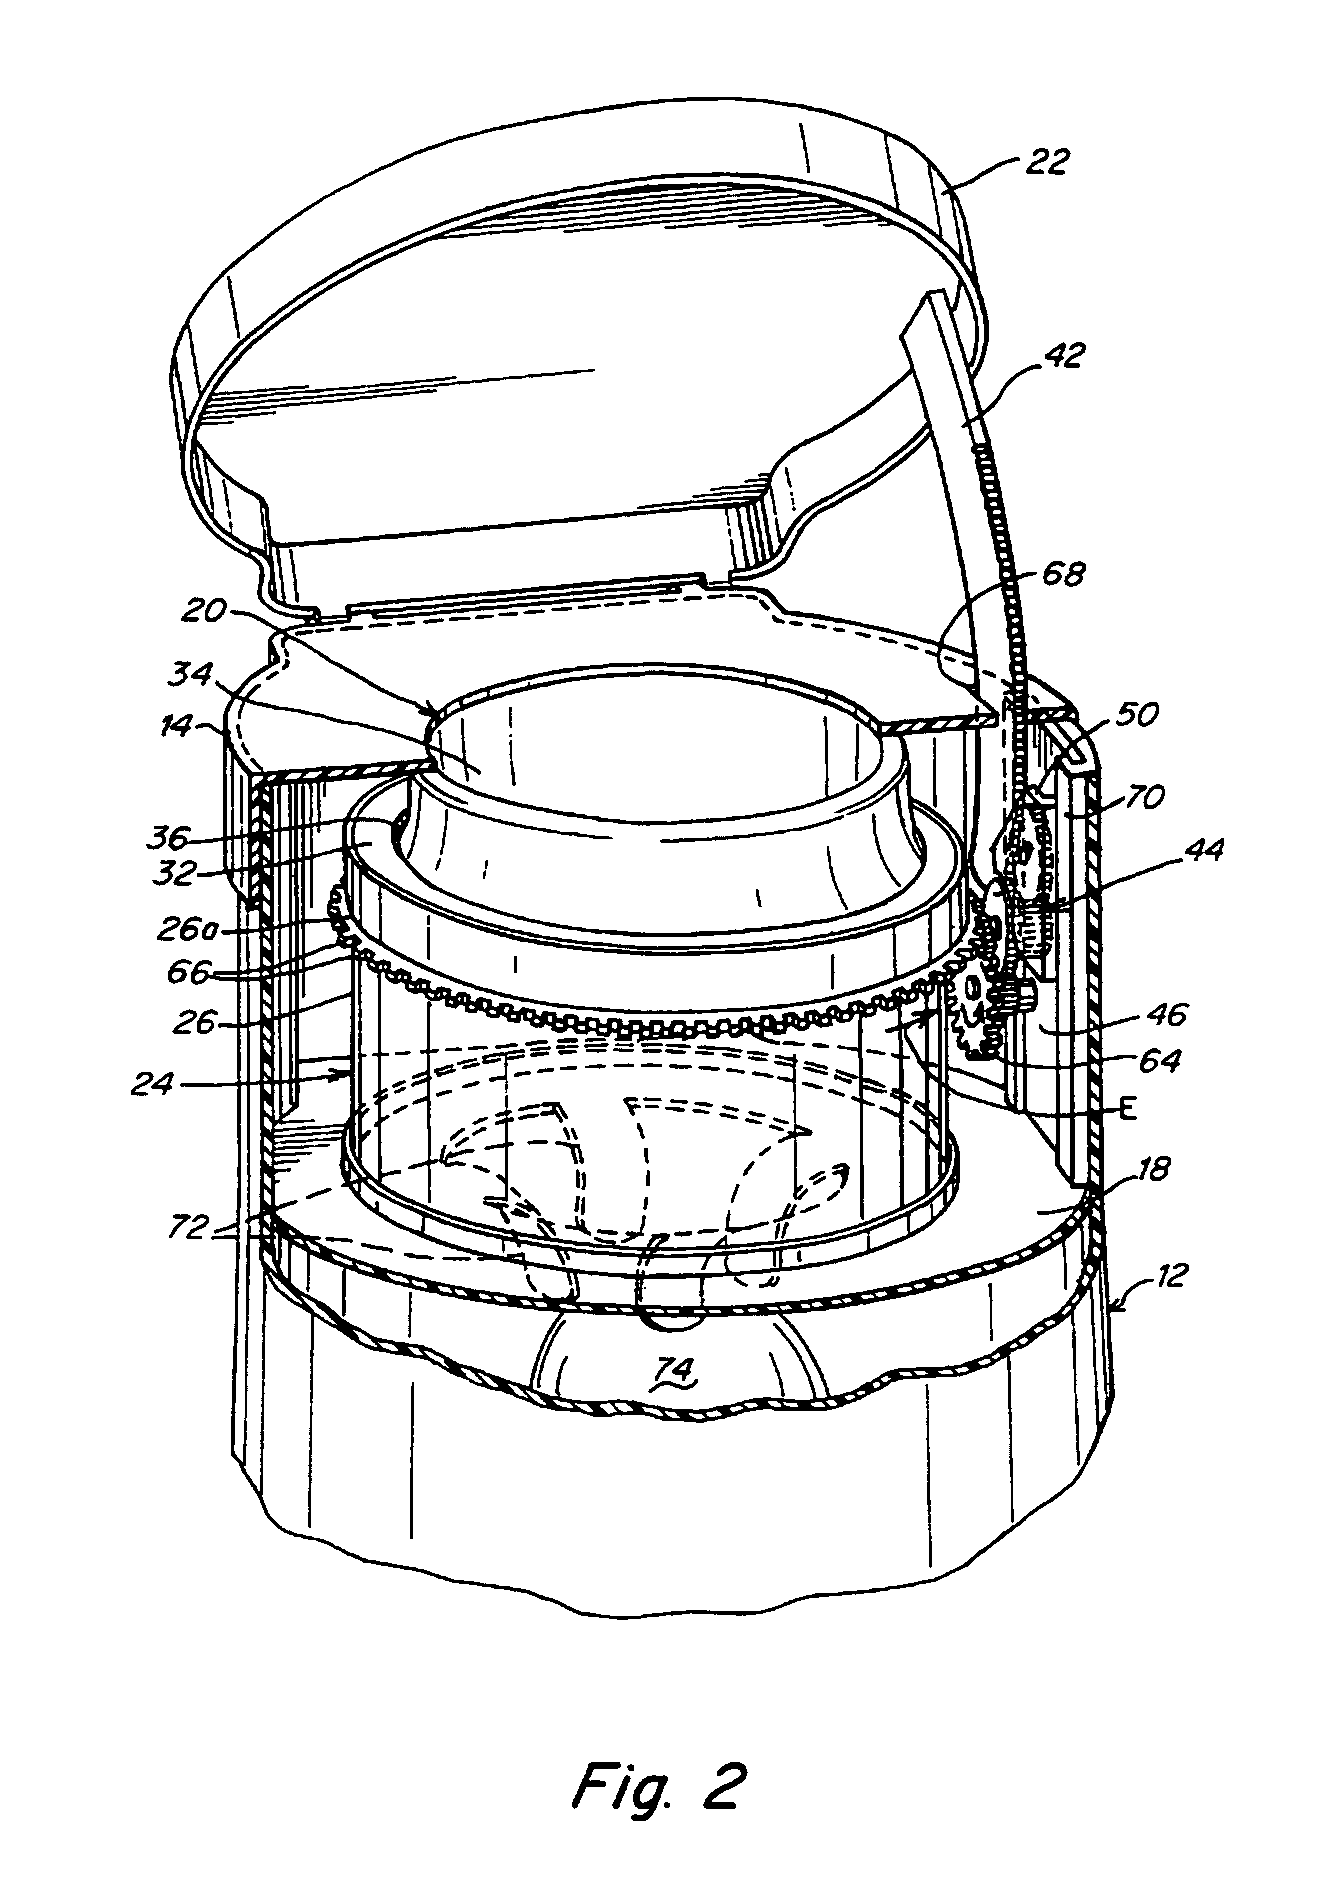 Waste disposal device including rotating cartridge coupled to lid